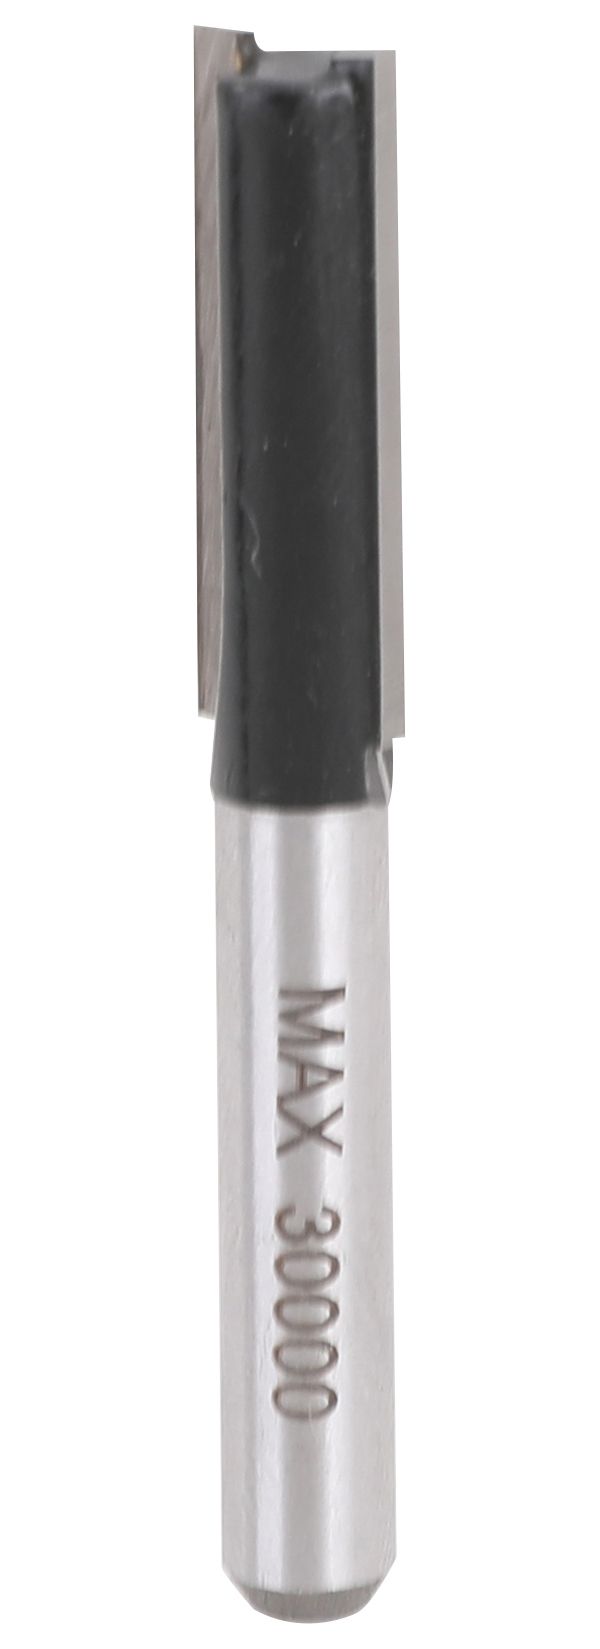 Wickes Straight Router Bit 1/4in - 8mm